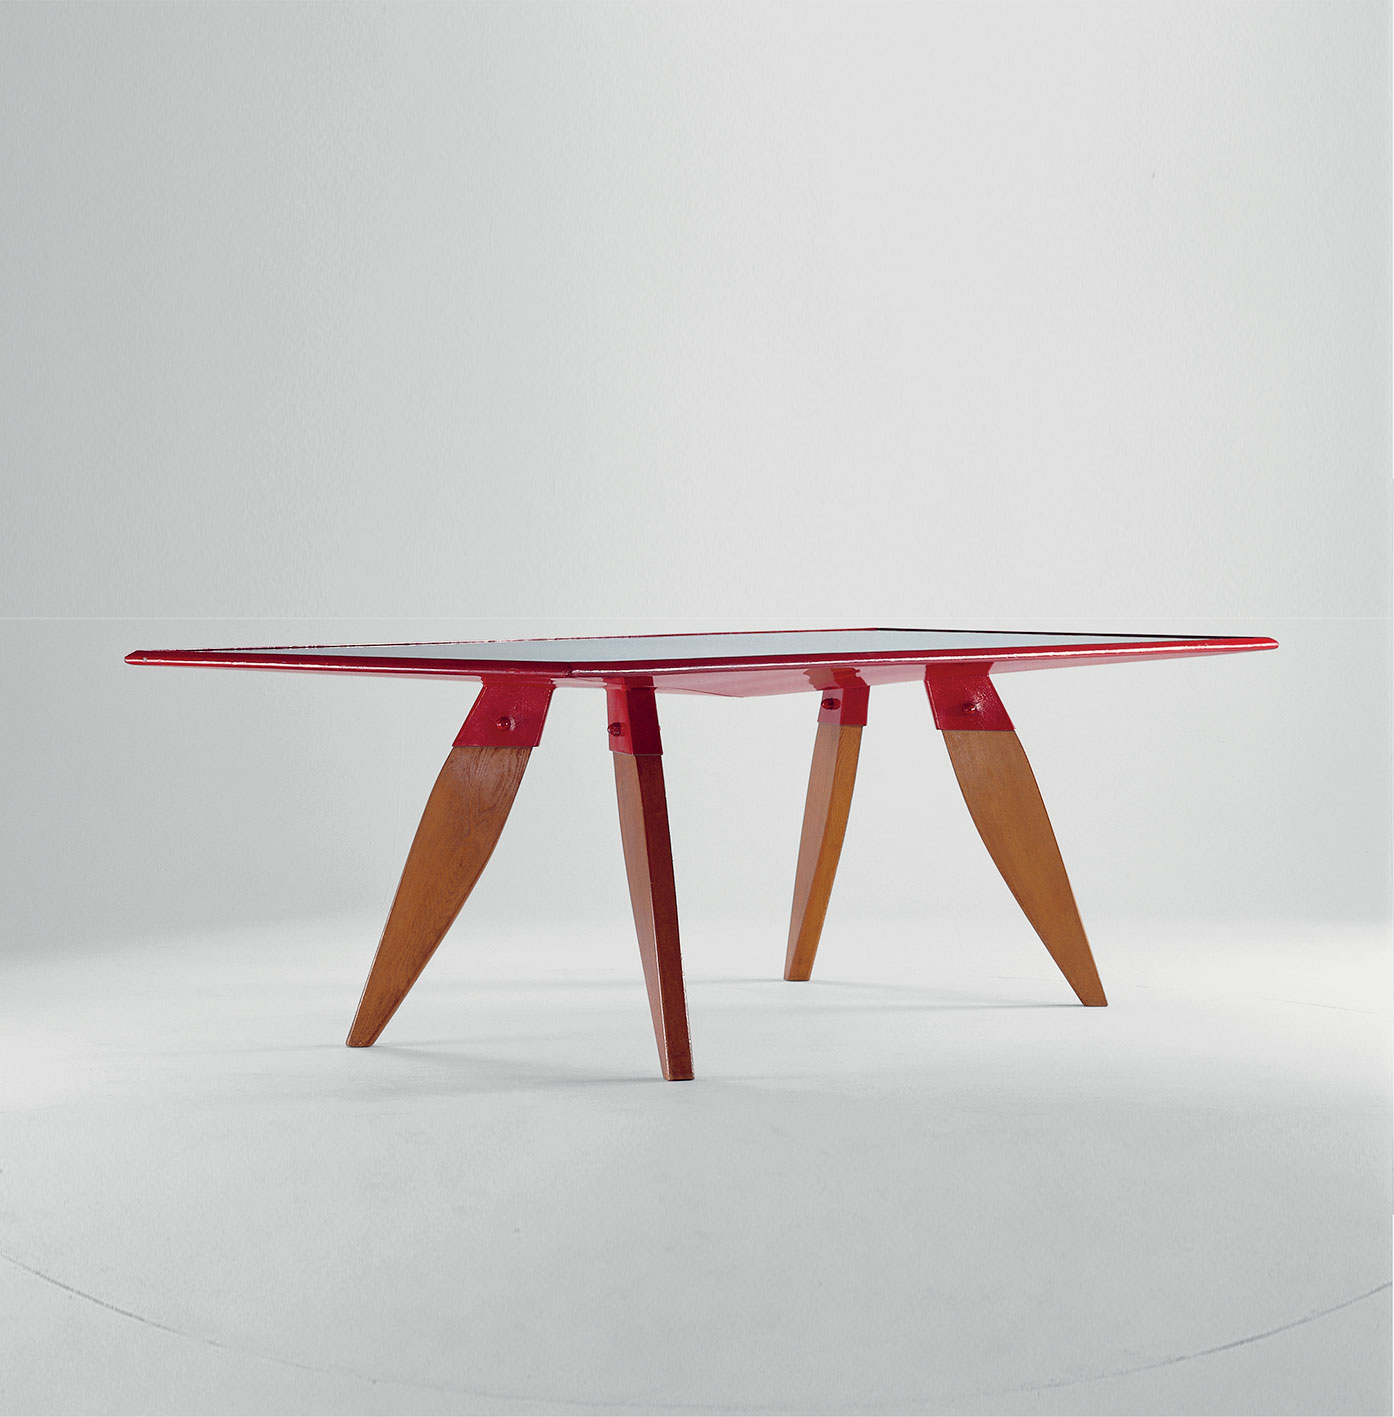 Special model table created for the 9th Milan Triennial, 1951. Unique piece.